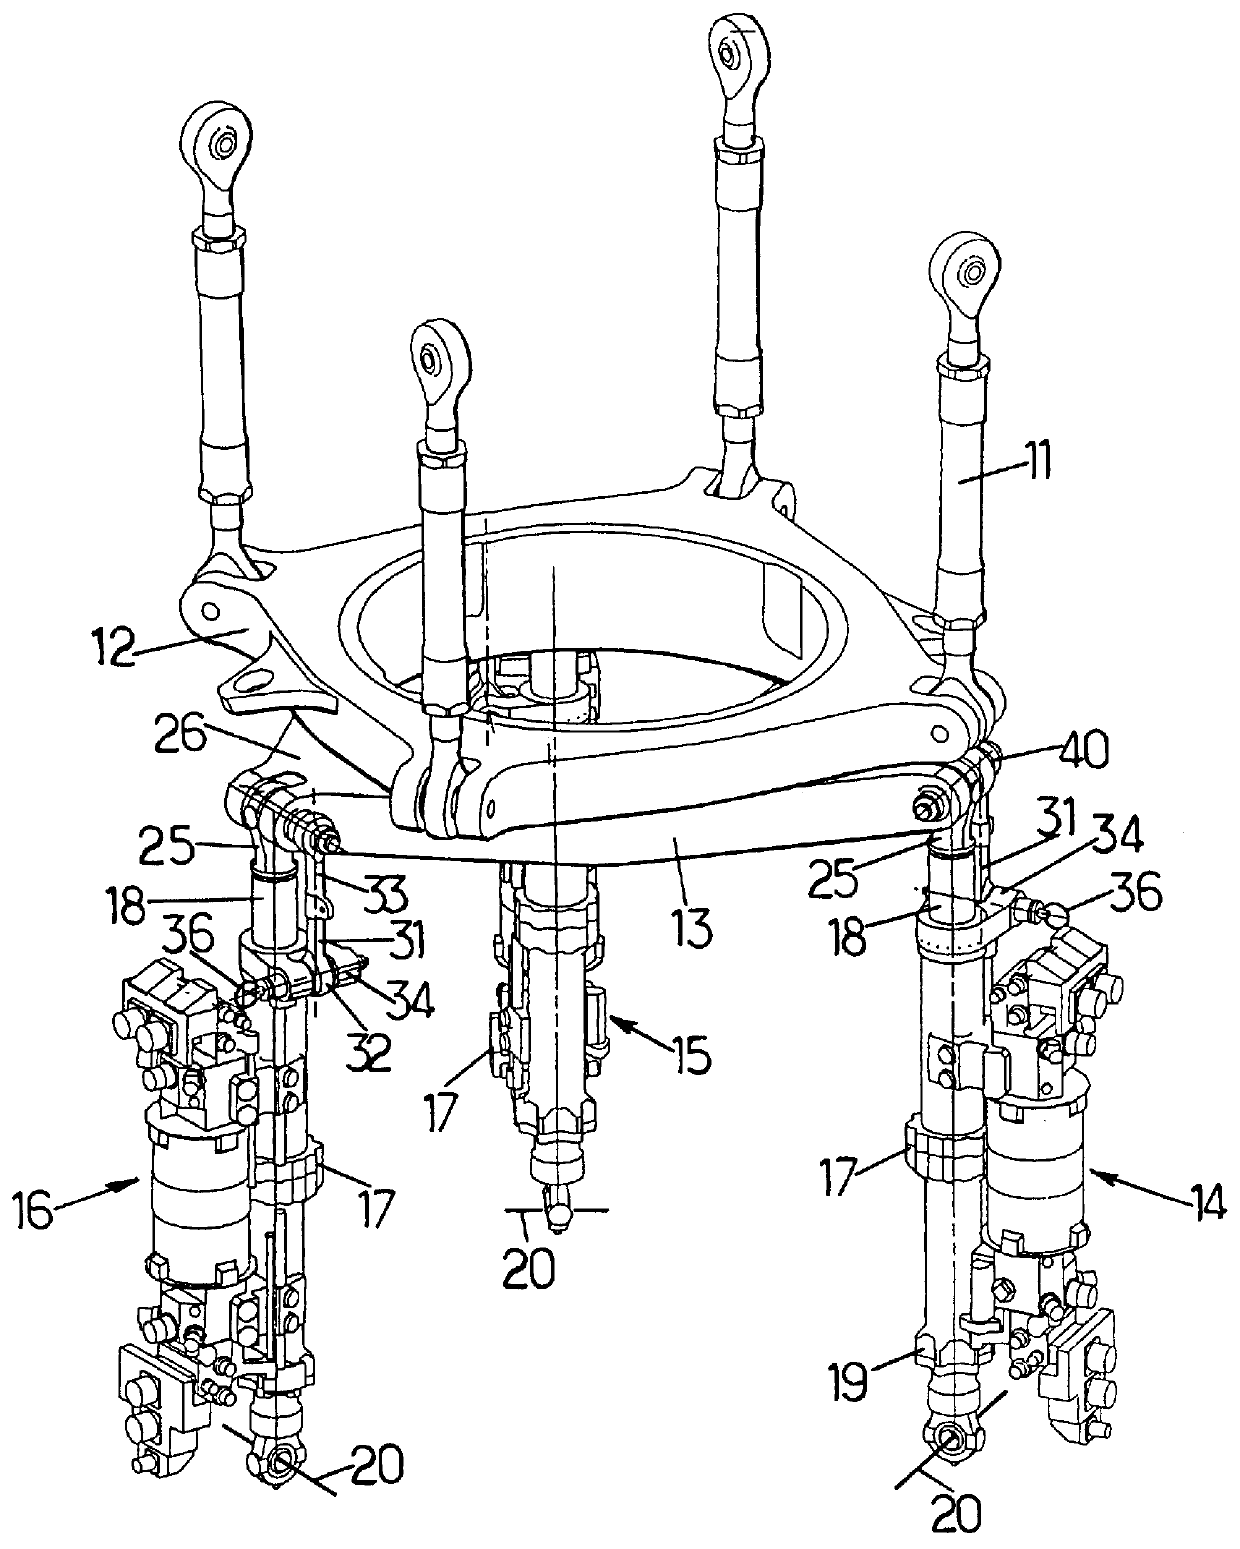 Blade pitch locking device for a main rotor of a rotary-wing aircraft